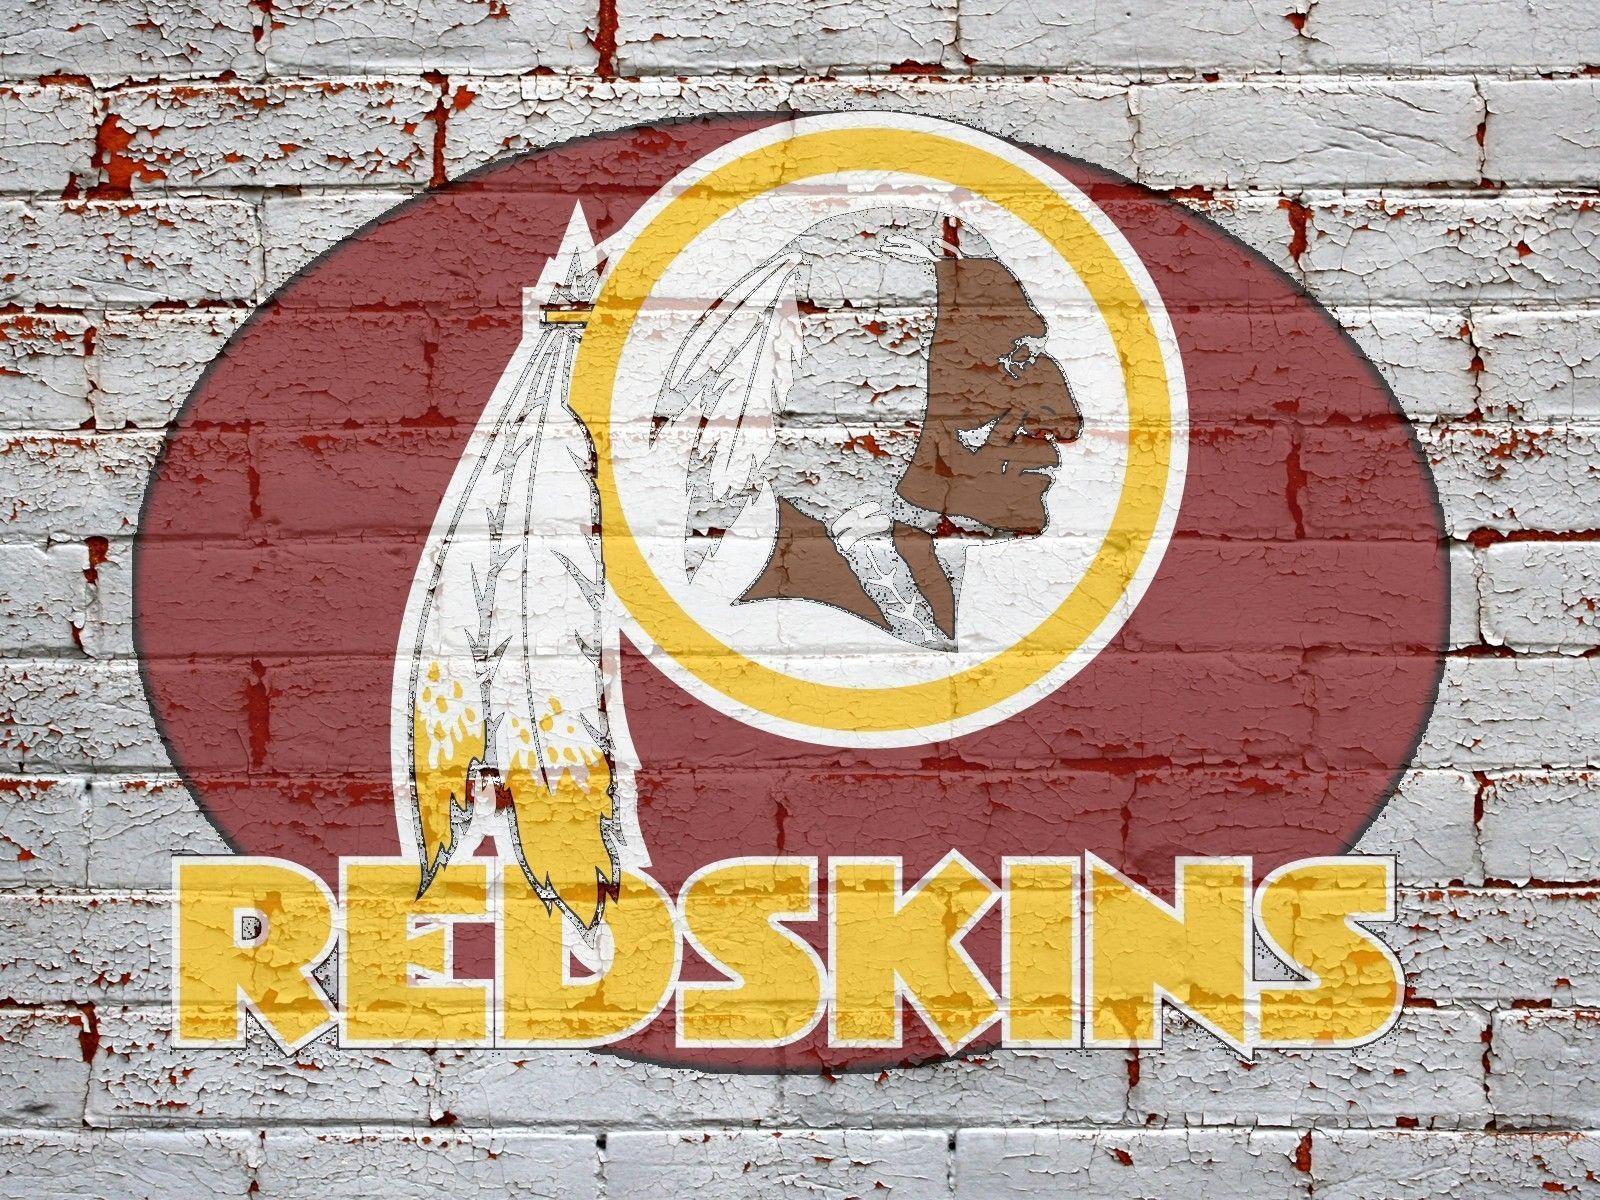 Redskins Background Picture Wallpaper